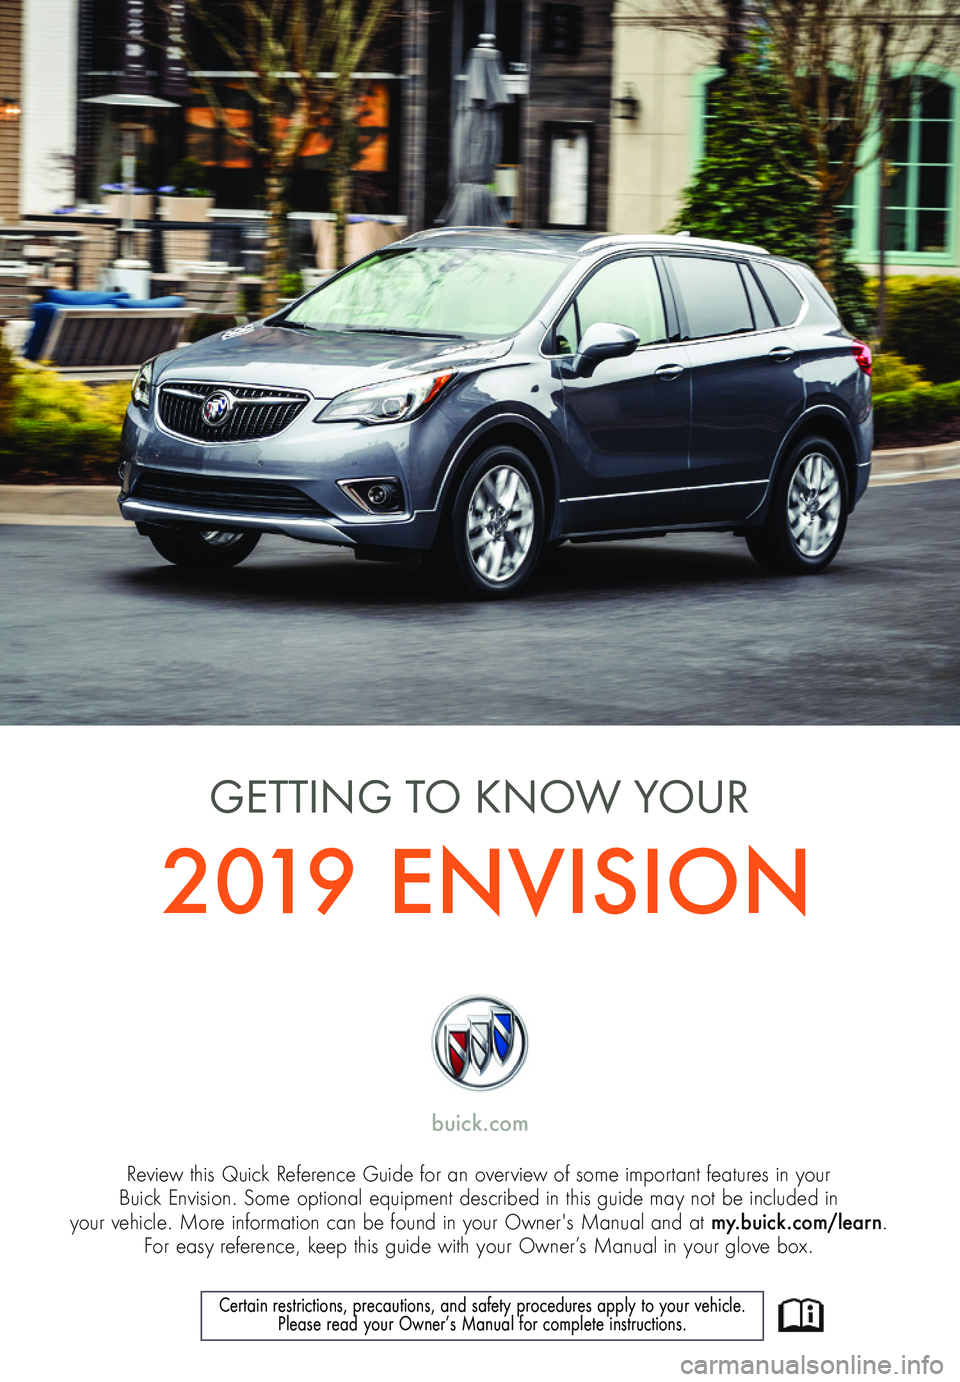 BUICK ENVISION 2019  Get To Know Guide 1
Review this Quick Reference Guide for an overview of some important features in your  Buick Envision. Some optional equipment described in this guide may not be included in  your vehicle. More infor